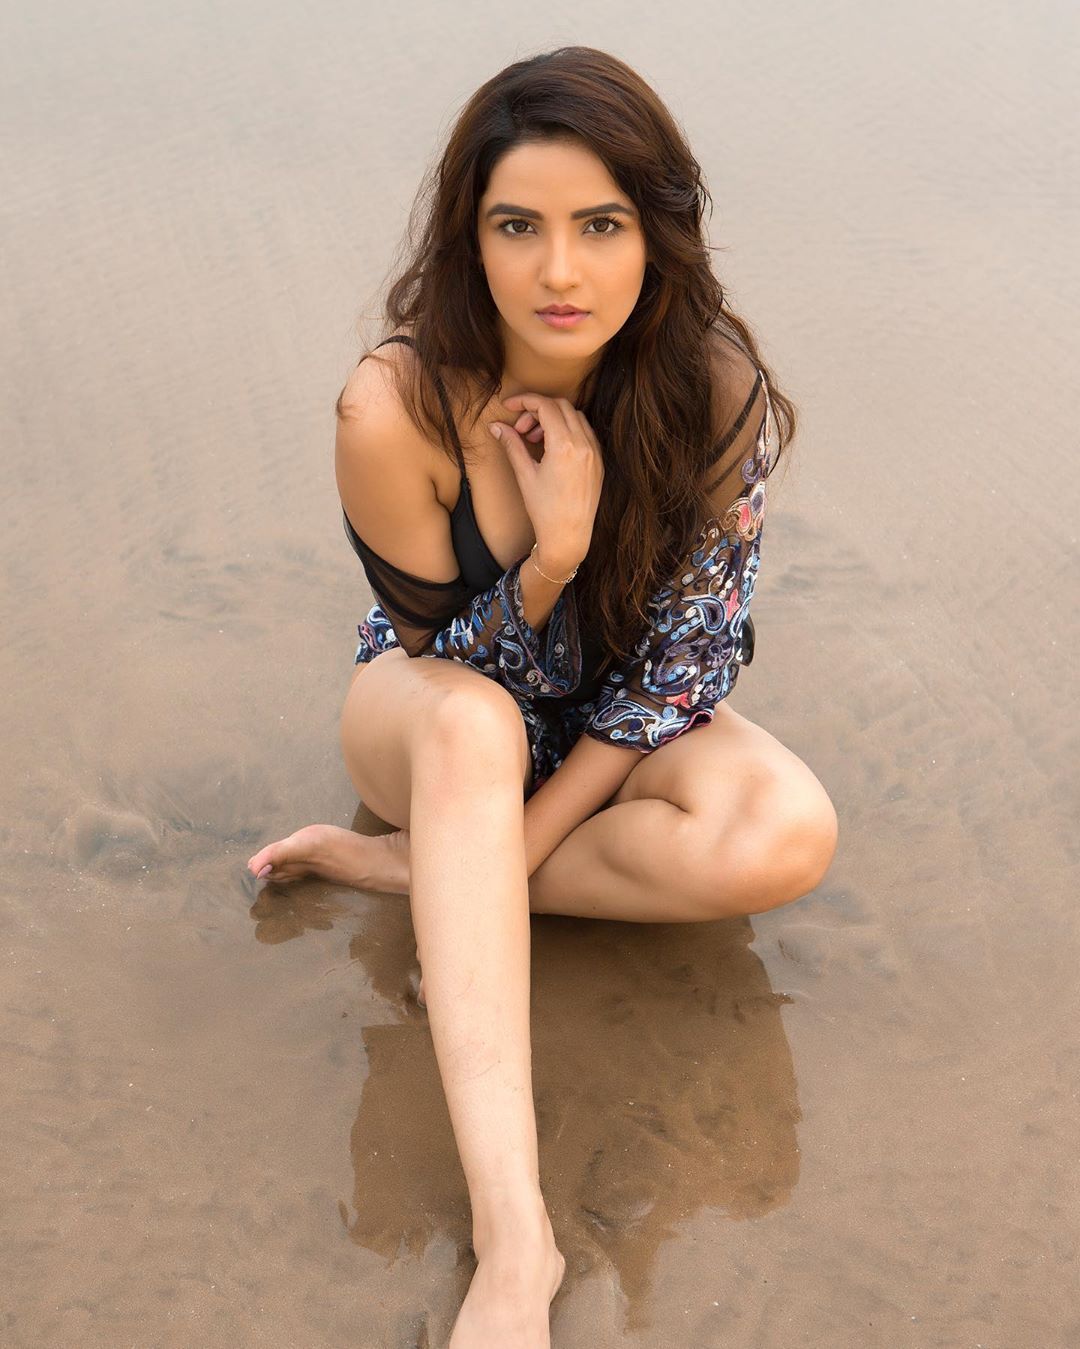 Jasmin Bhasin Quits Eating Butter Chicken And Pizzas To Look Hot For Naagin 4, Feels Previous Actresses Set High Standards